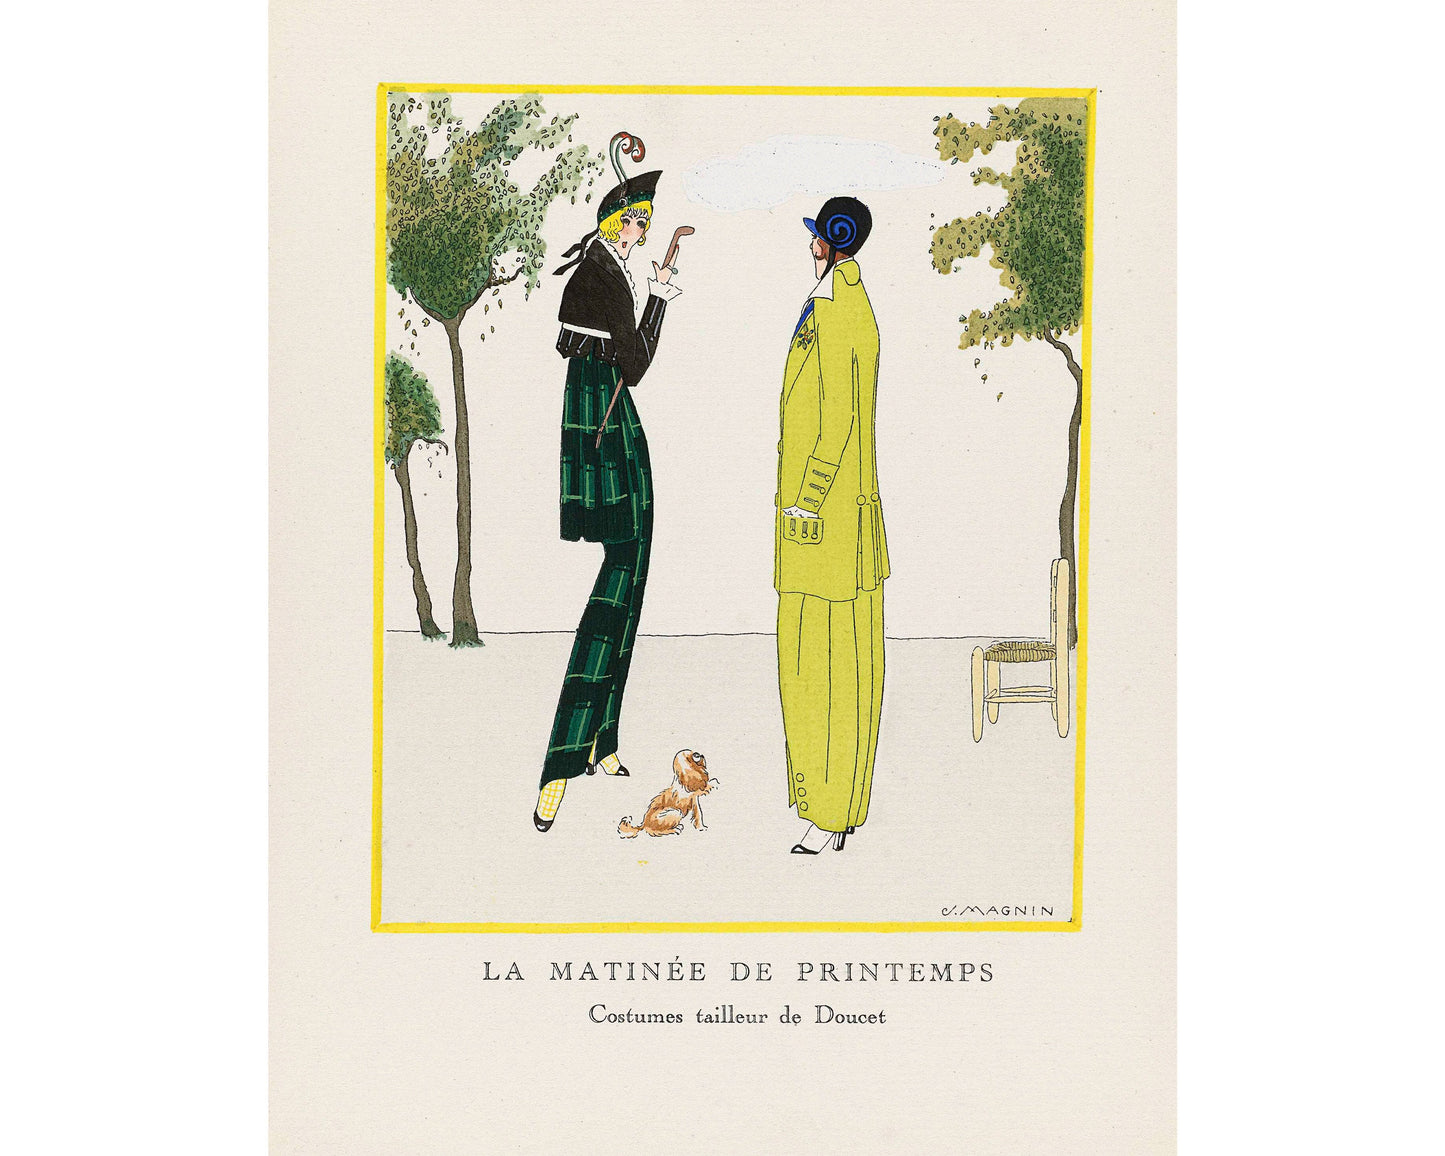 Vintage French outdoor fashion | Spring day in the park | 1920's fashion plate | Art deco art | Giclée fine art print | Eco-friendly gift